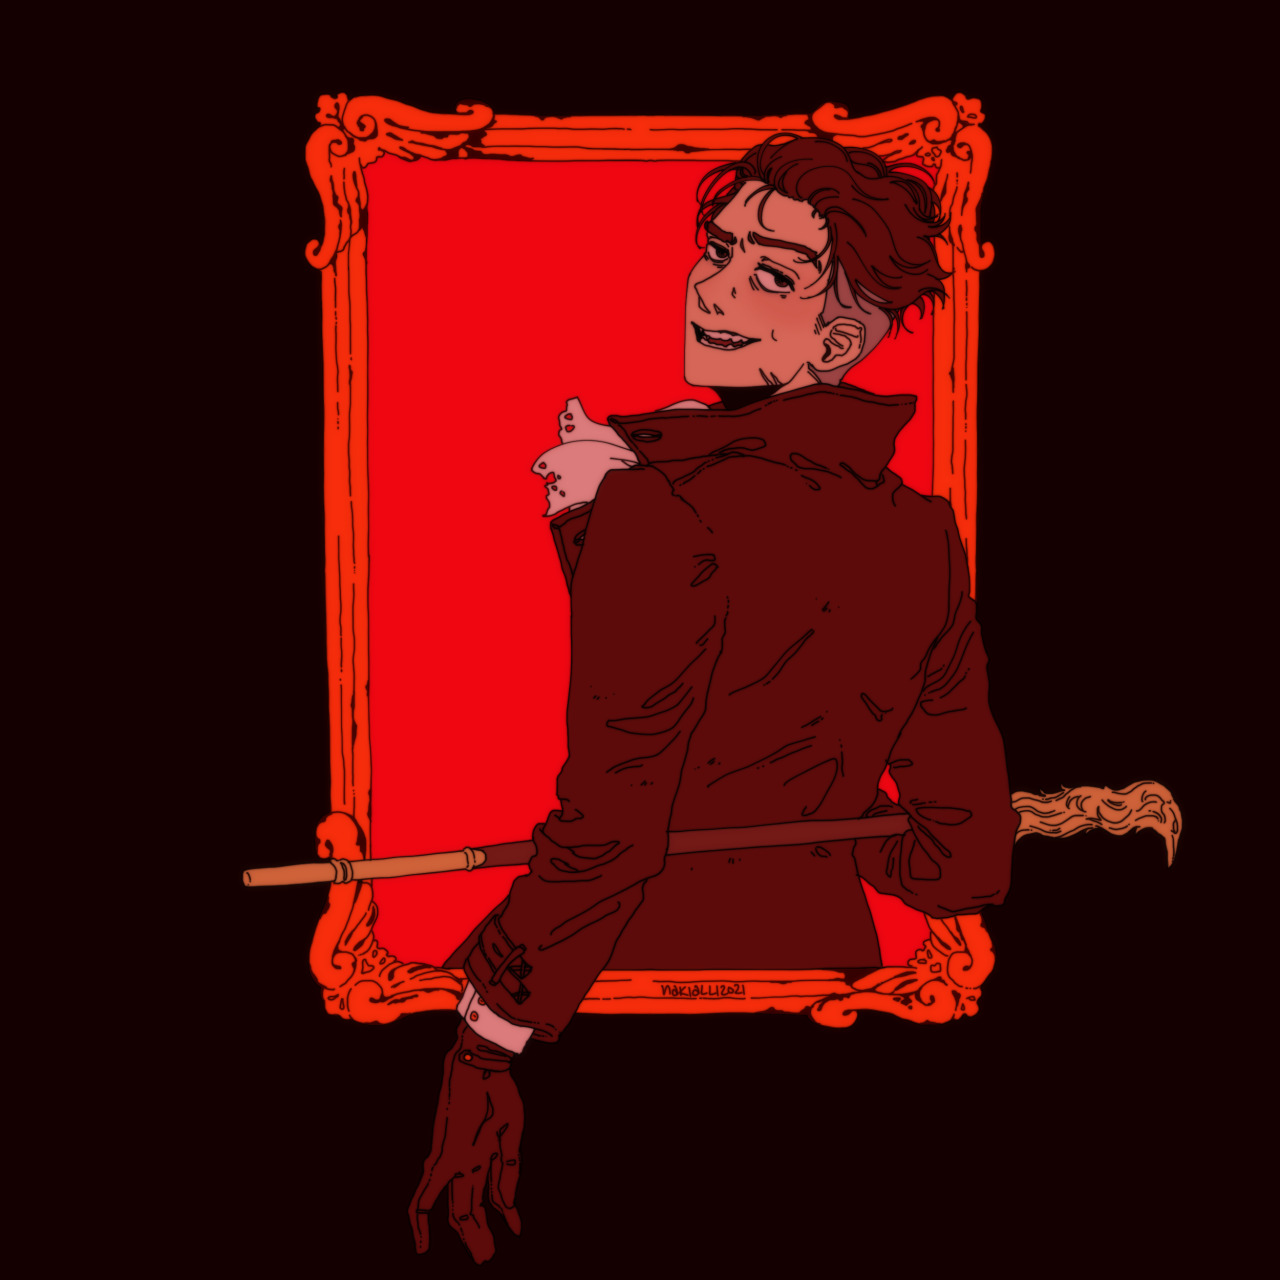 KAZ BREKKERRRRRRRRRRR #kaz brekker #bastard of the barrel #dirtyhands #a good investor  #inejs one true love after her ship the wraith  #what more can i say  #i know i know theres a whole discourse with the cane  #six of crows  #shadow and bone #leigh bardugo#kaz brekkerrrrrrr#demjin#crooked kingdom#grishaverse#kaz rietveld#the dregs #kaz is my tie straight brekker #kaz fanart #kaz brekker fanart  #kaz brekker art  #six of crows fanart